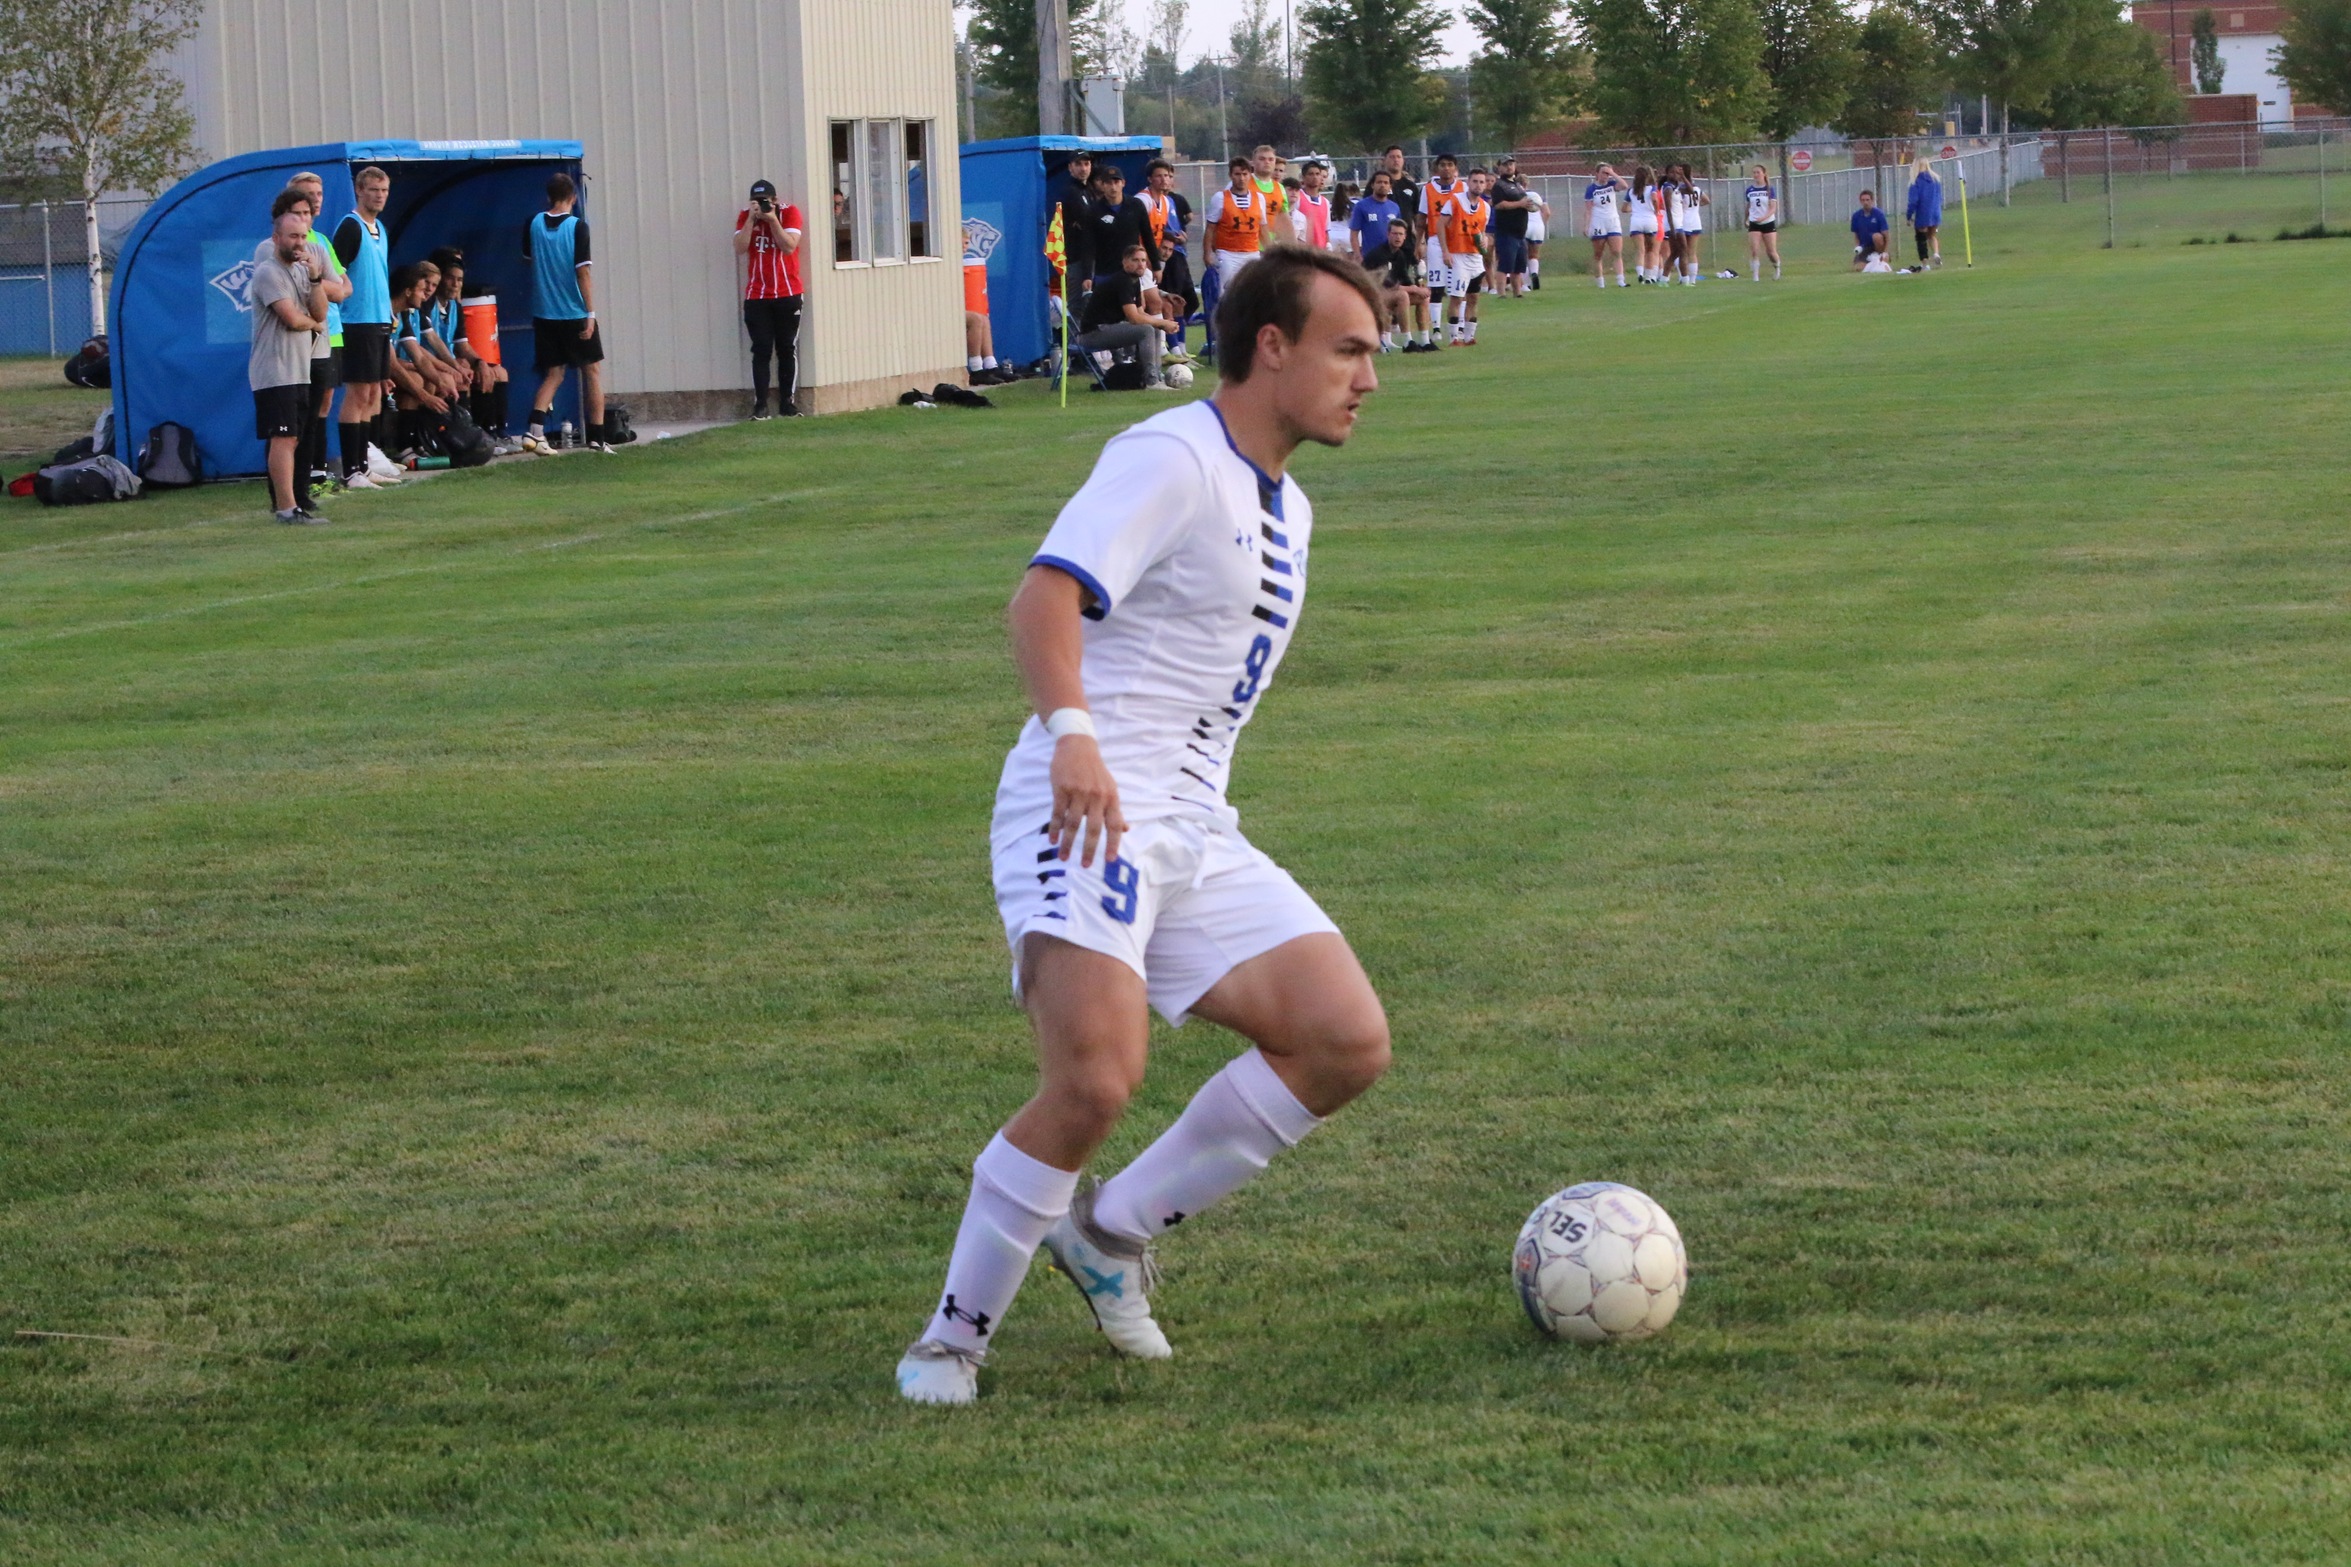 TIGERS FALL 4-0 IN MATCHUP WITH JAMESTOWN